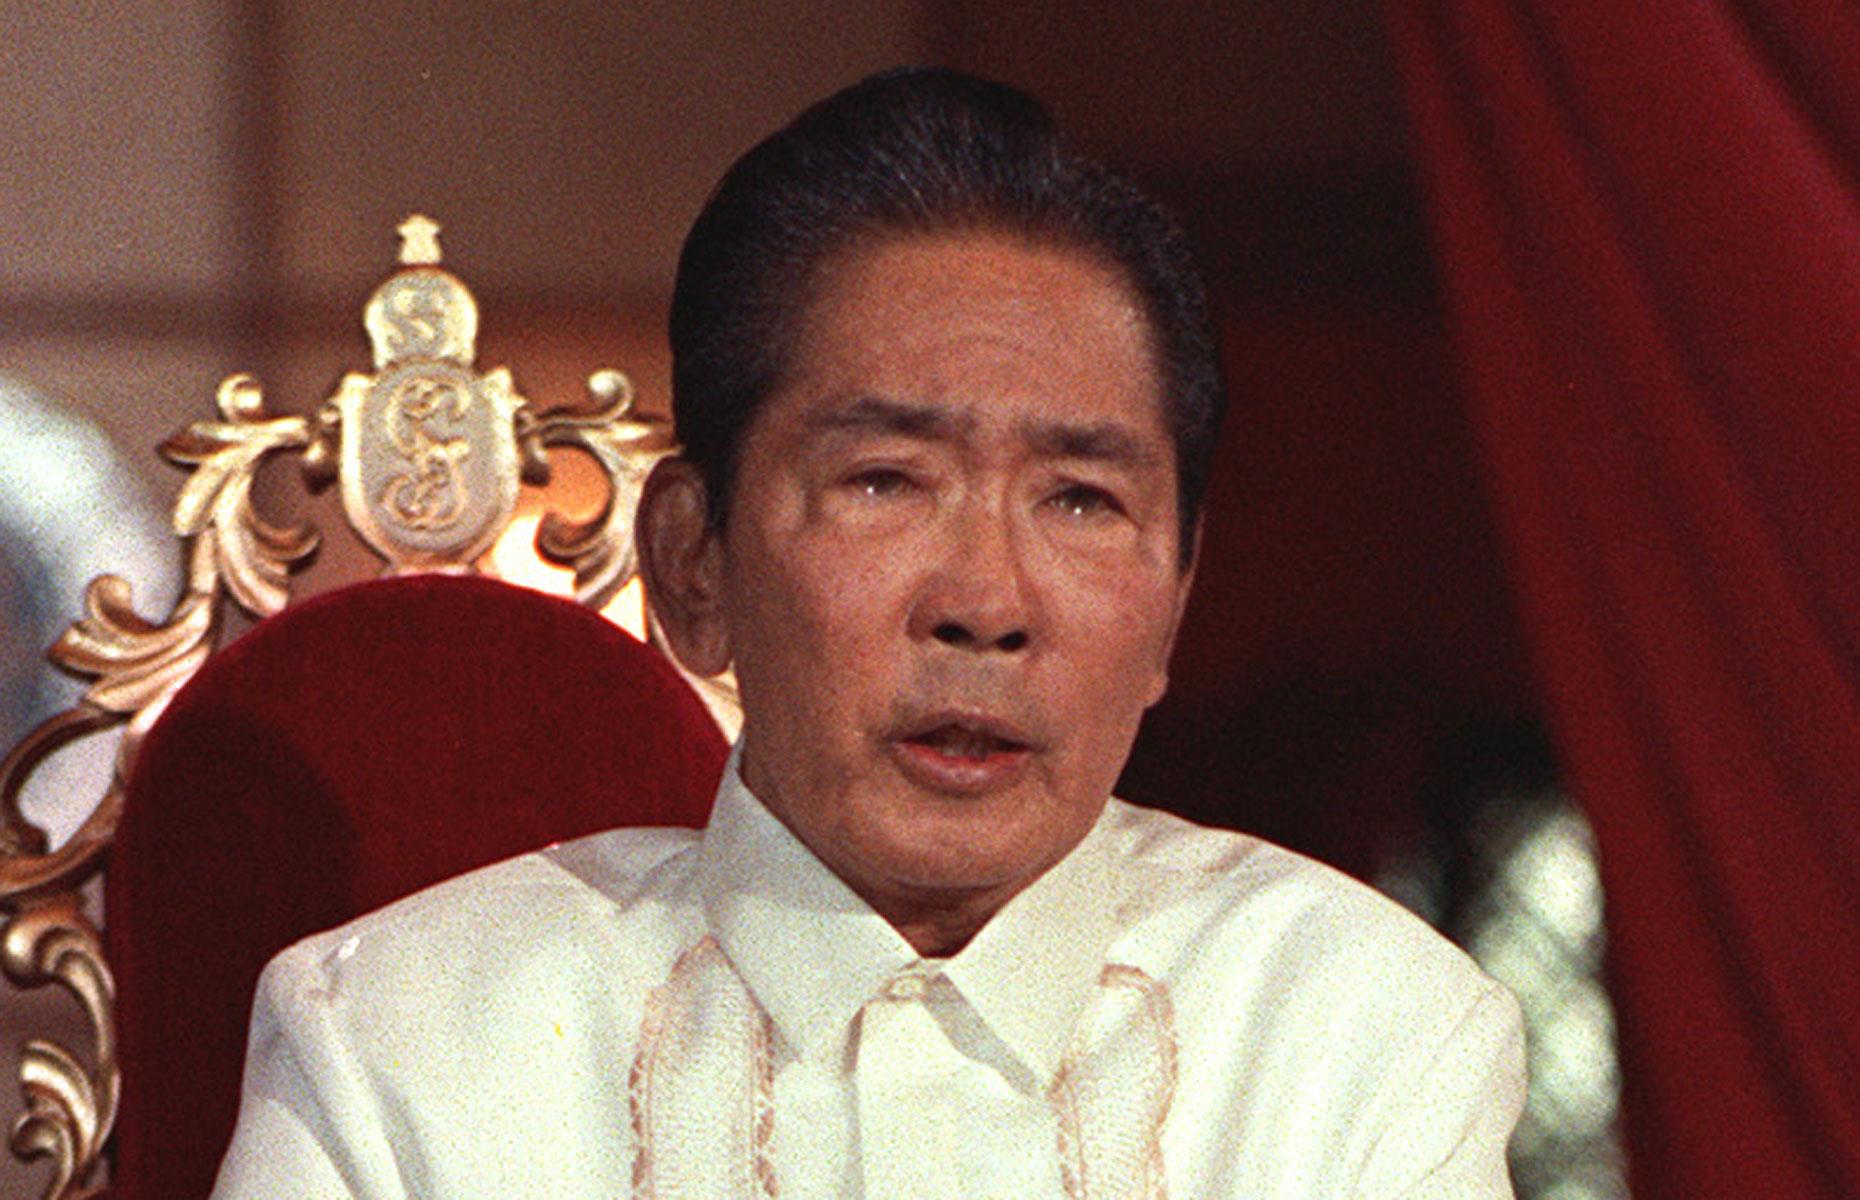 <p>Cruel and corrupt, Ferdinand Marcos was president of the Philippines from 1972 to 1986. Together with his wife Imelda, who is widely known for her collection of over 3,000 high-end shoes, the despot embezzled hundreds of millions and, if reports are correct, up to $53.1 billion in today's money went missing during his dictatorship.</p>  <p><strong>Now read about <a href="https://www.lovemoney.com/galleries/49551/the-worlds-50-richest-families-revealed?page=1">the world's richest families</a></strong></p>